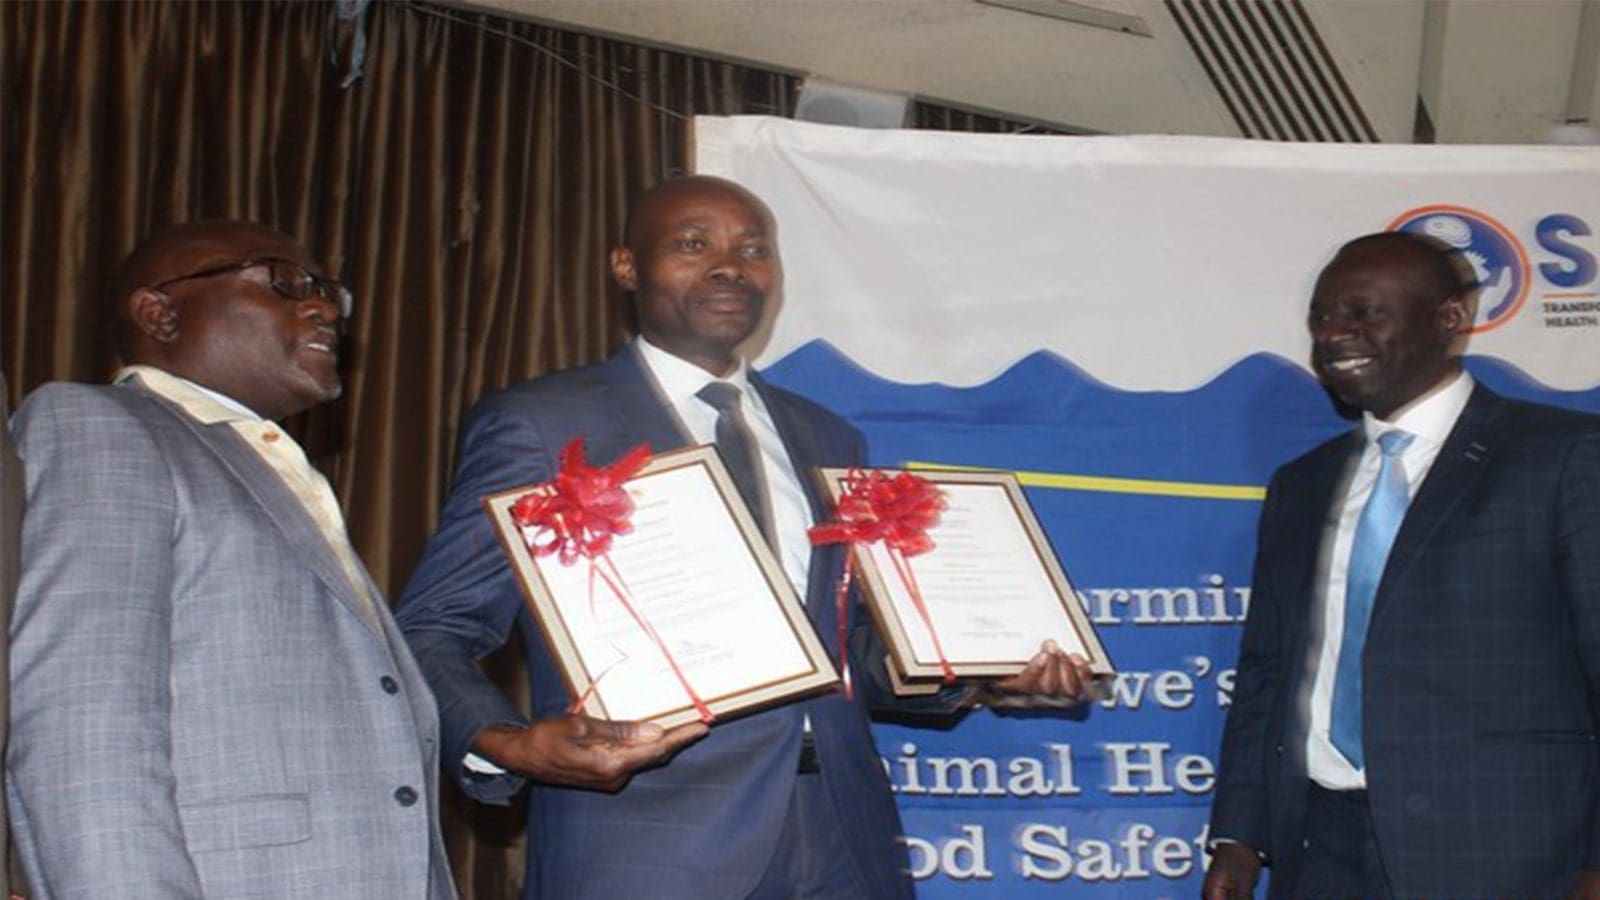 Zimbabwe’s Government Analyst Laboratory achieves international recognition for food safety testing